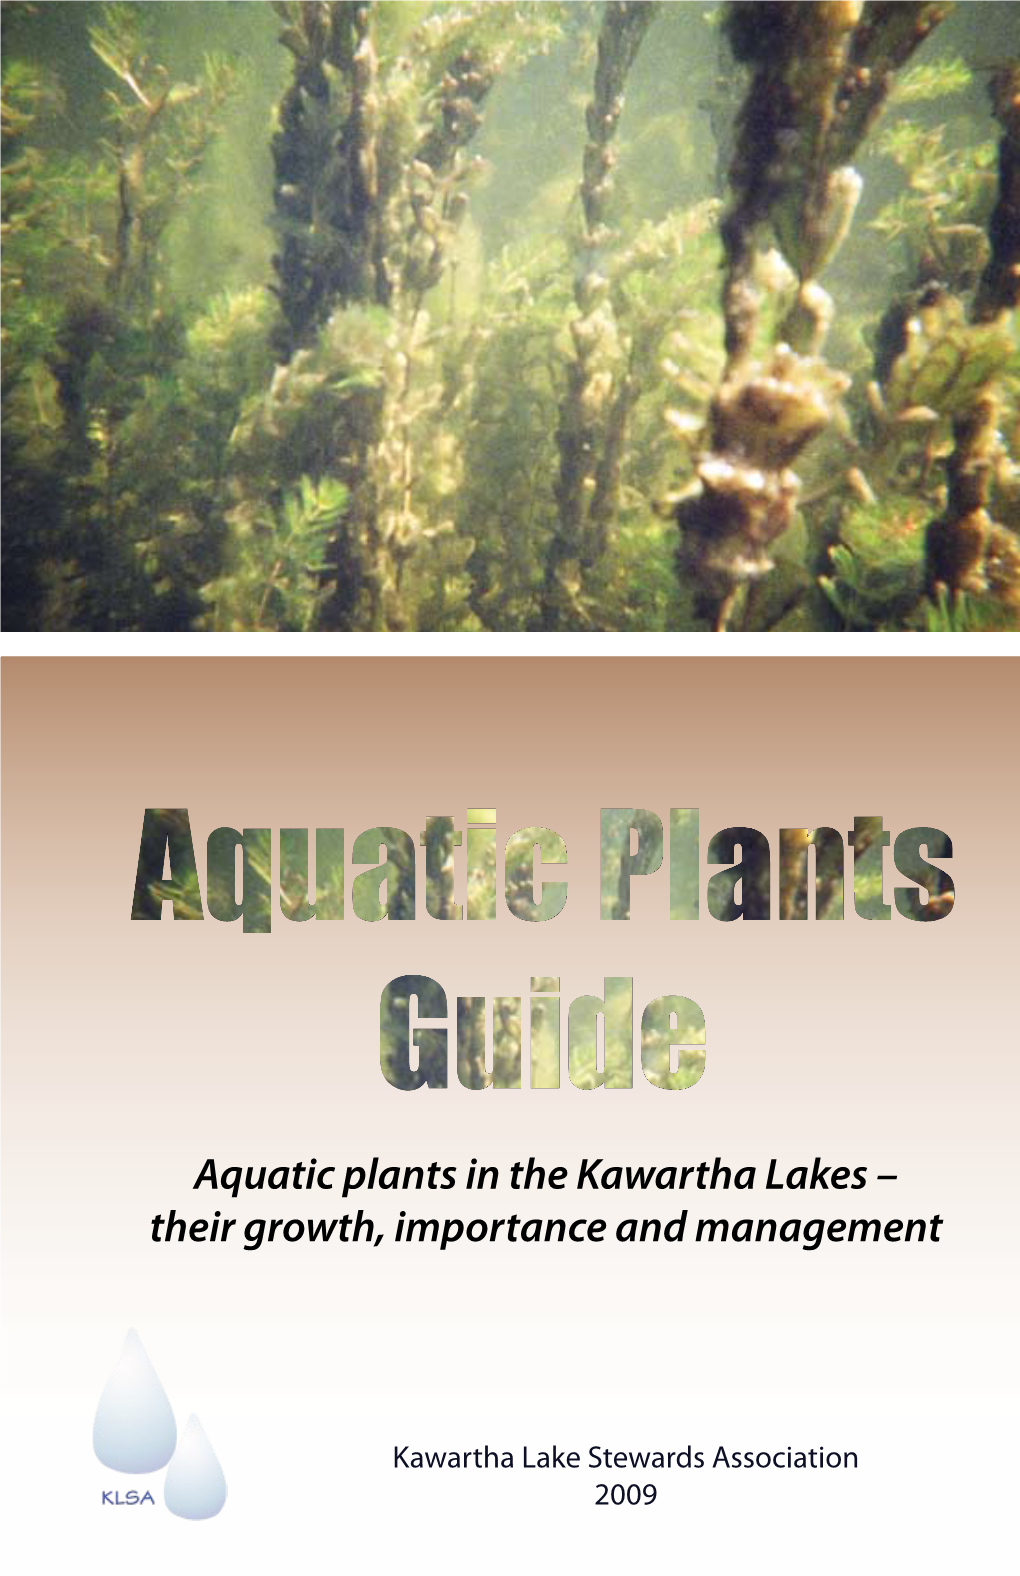 Aquatic Plants in the Kawartha Lakes – Their Growth, Importance and Management